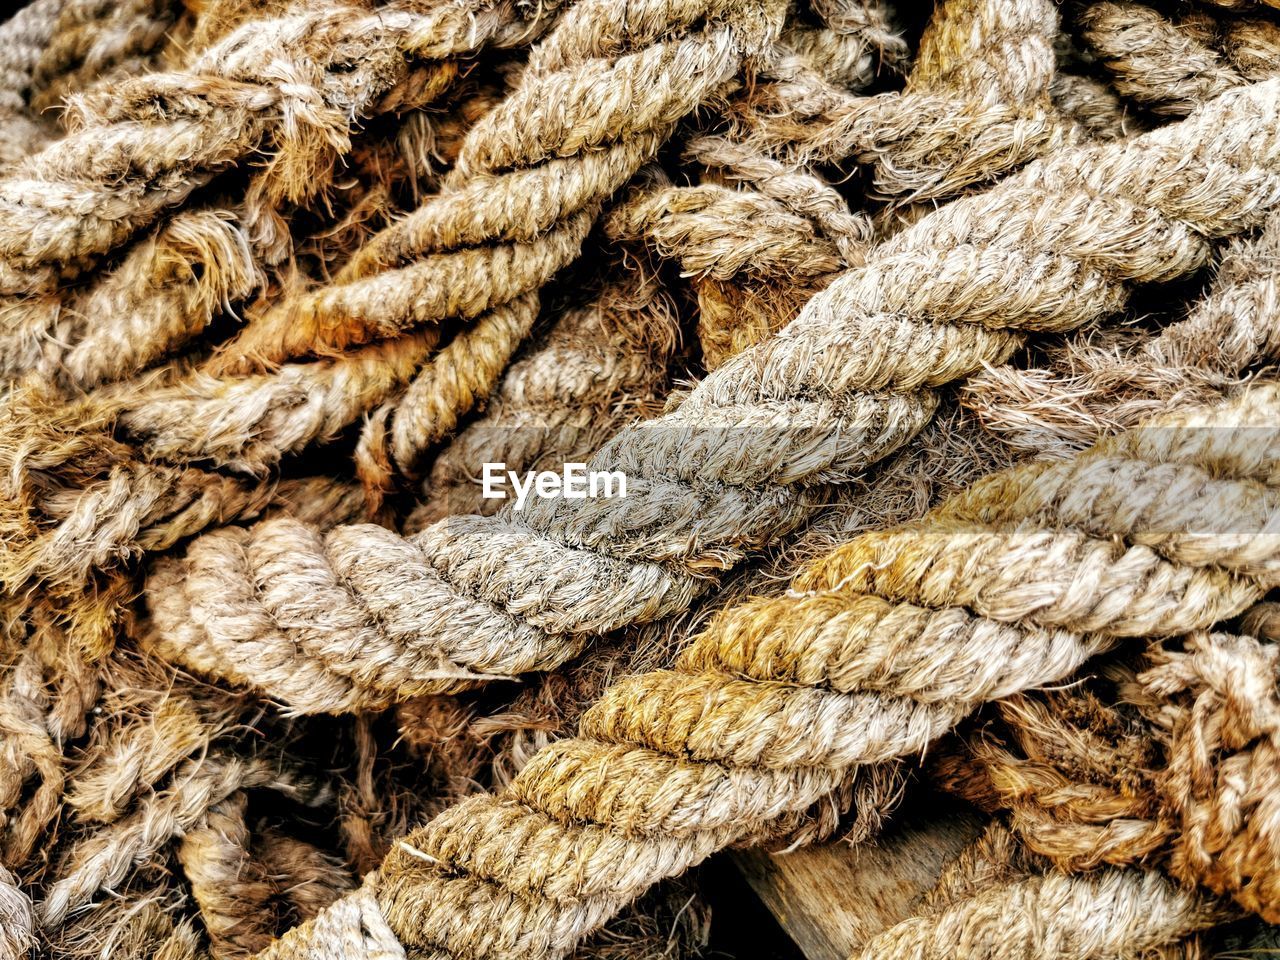 FULL FRAME SHOT OF ROPE TIED UP ON WOOD